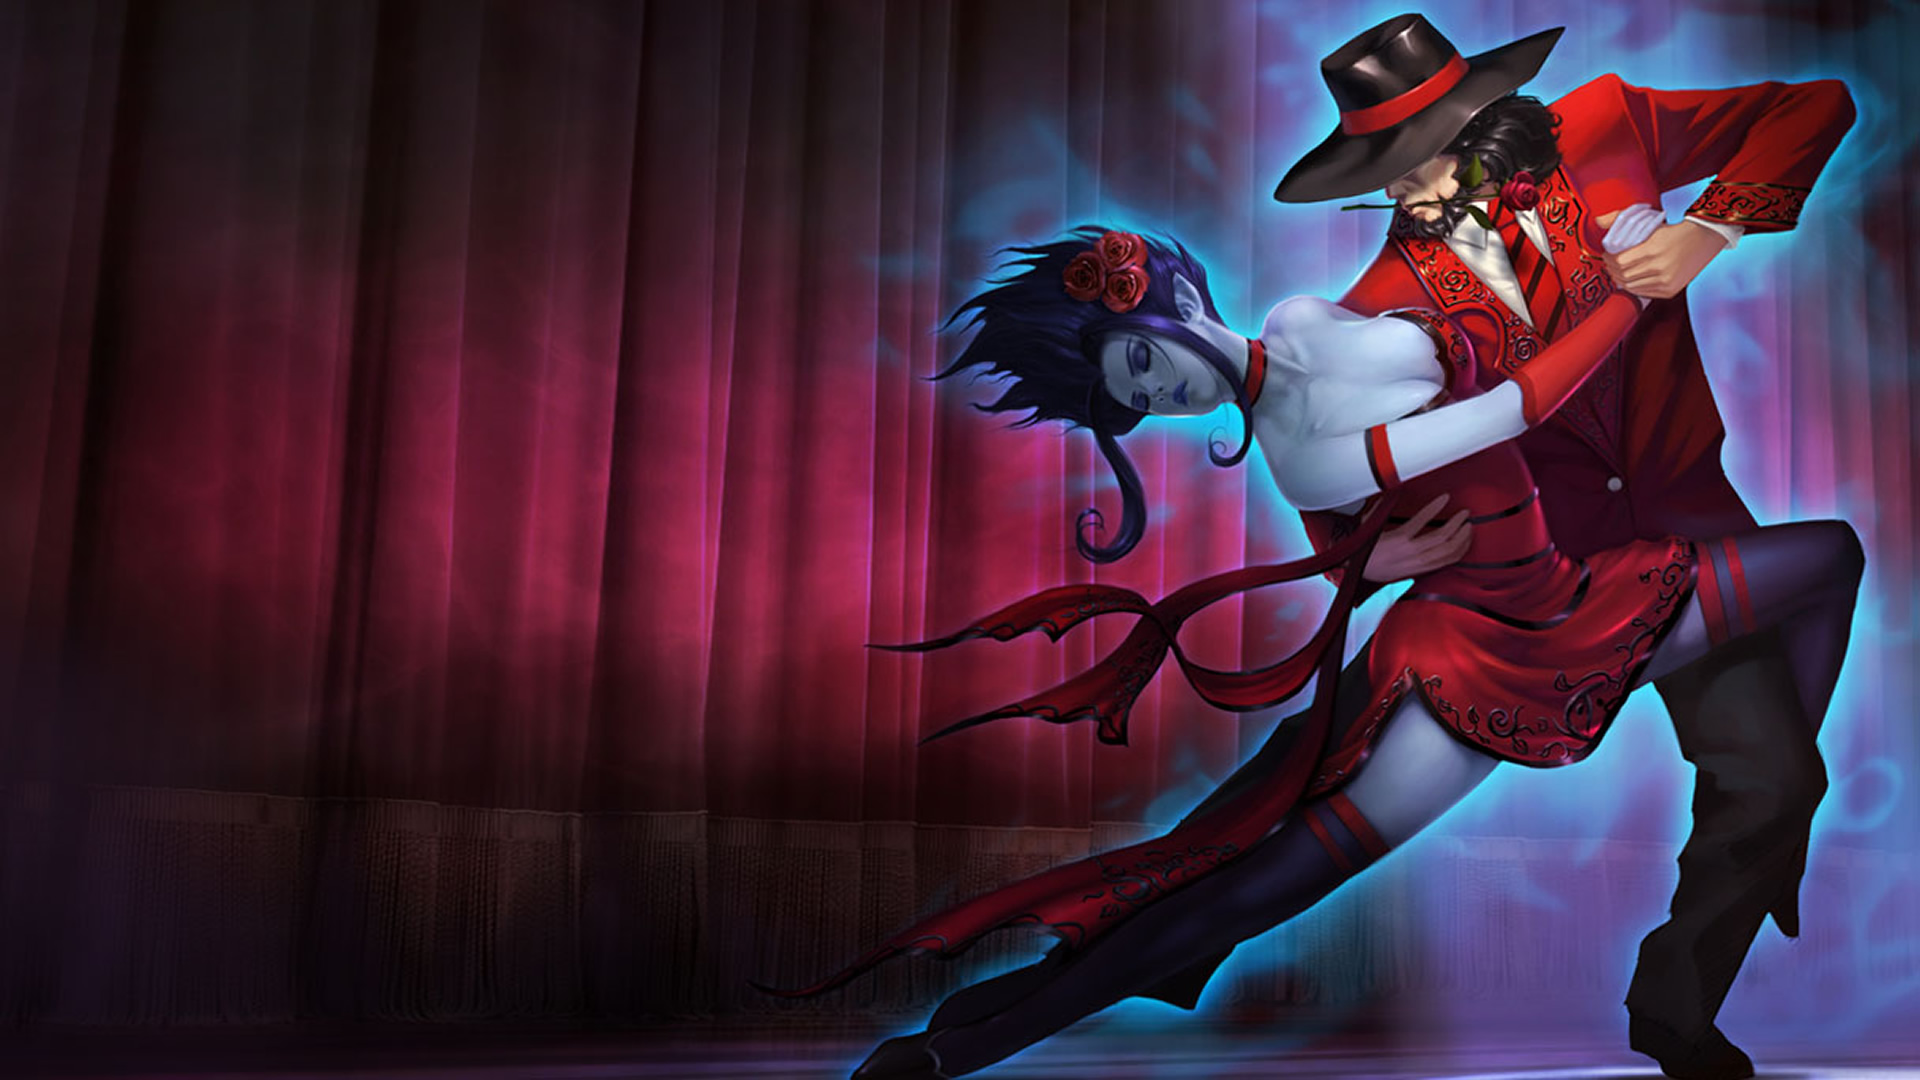 Tango Twisted Fate Wallpaper   Download Gaming Wallpapers 1920x1080